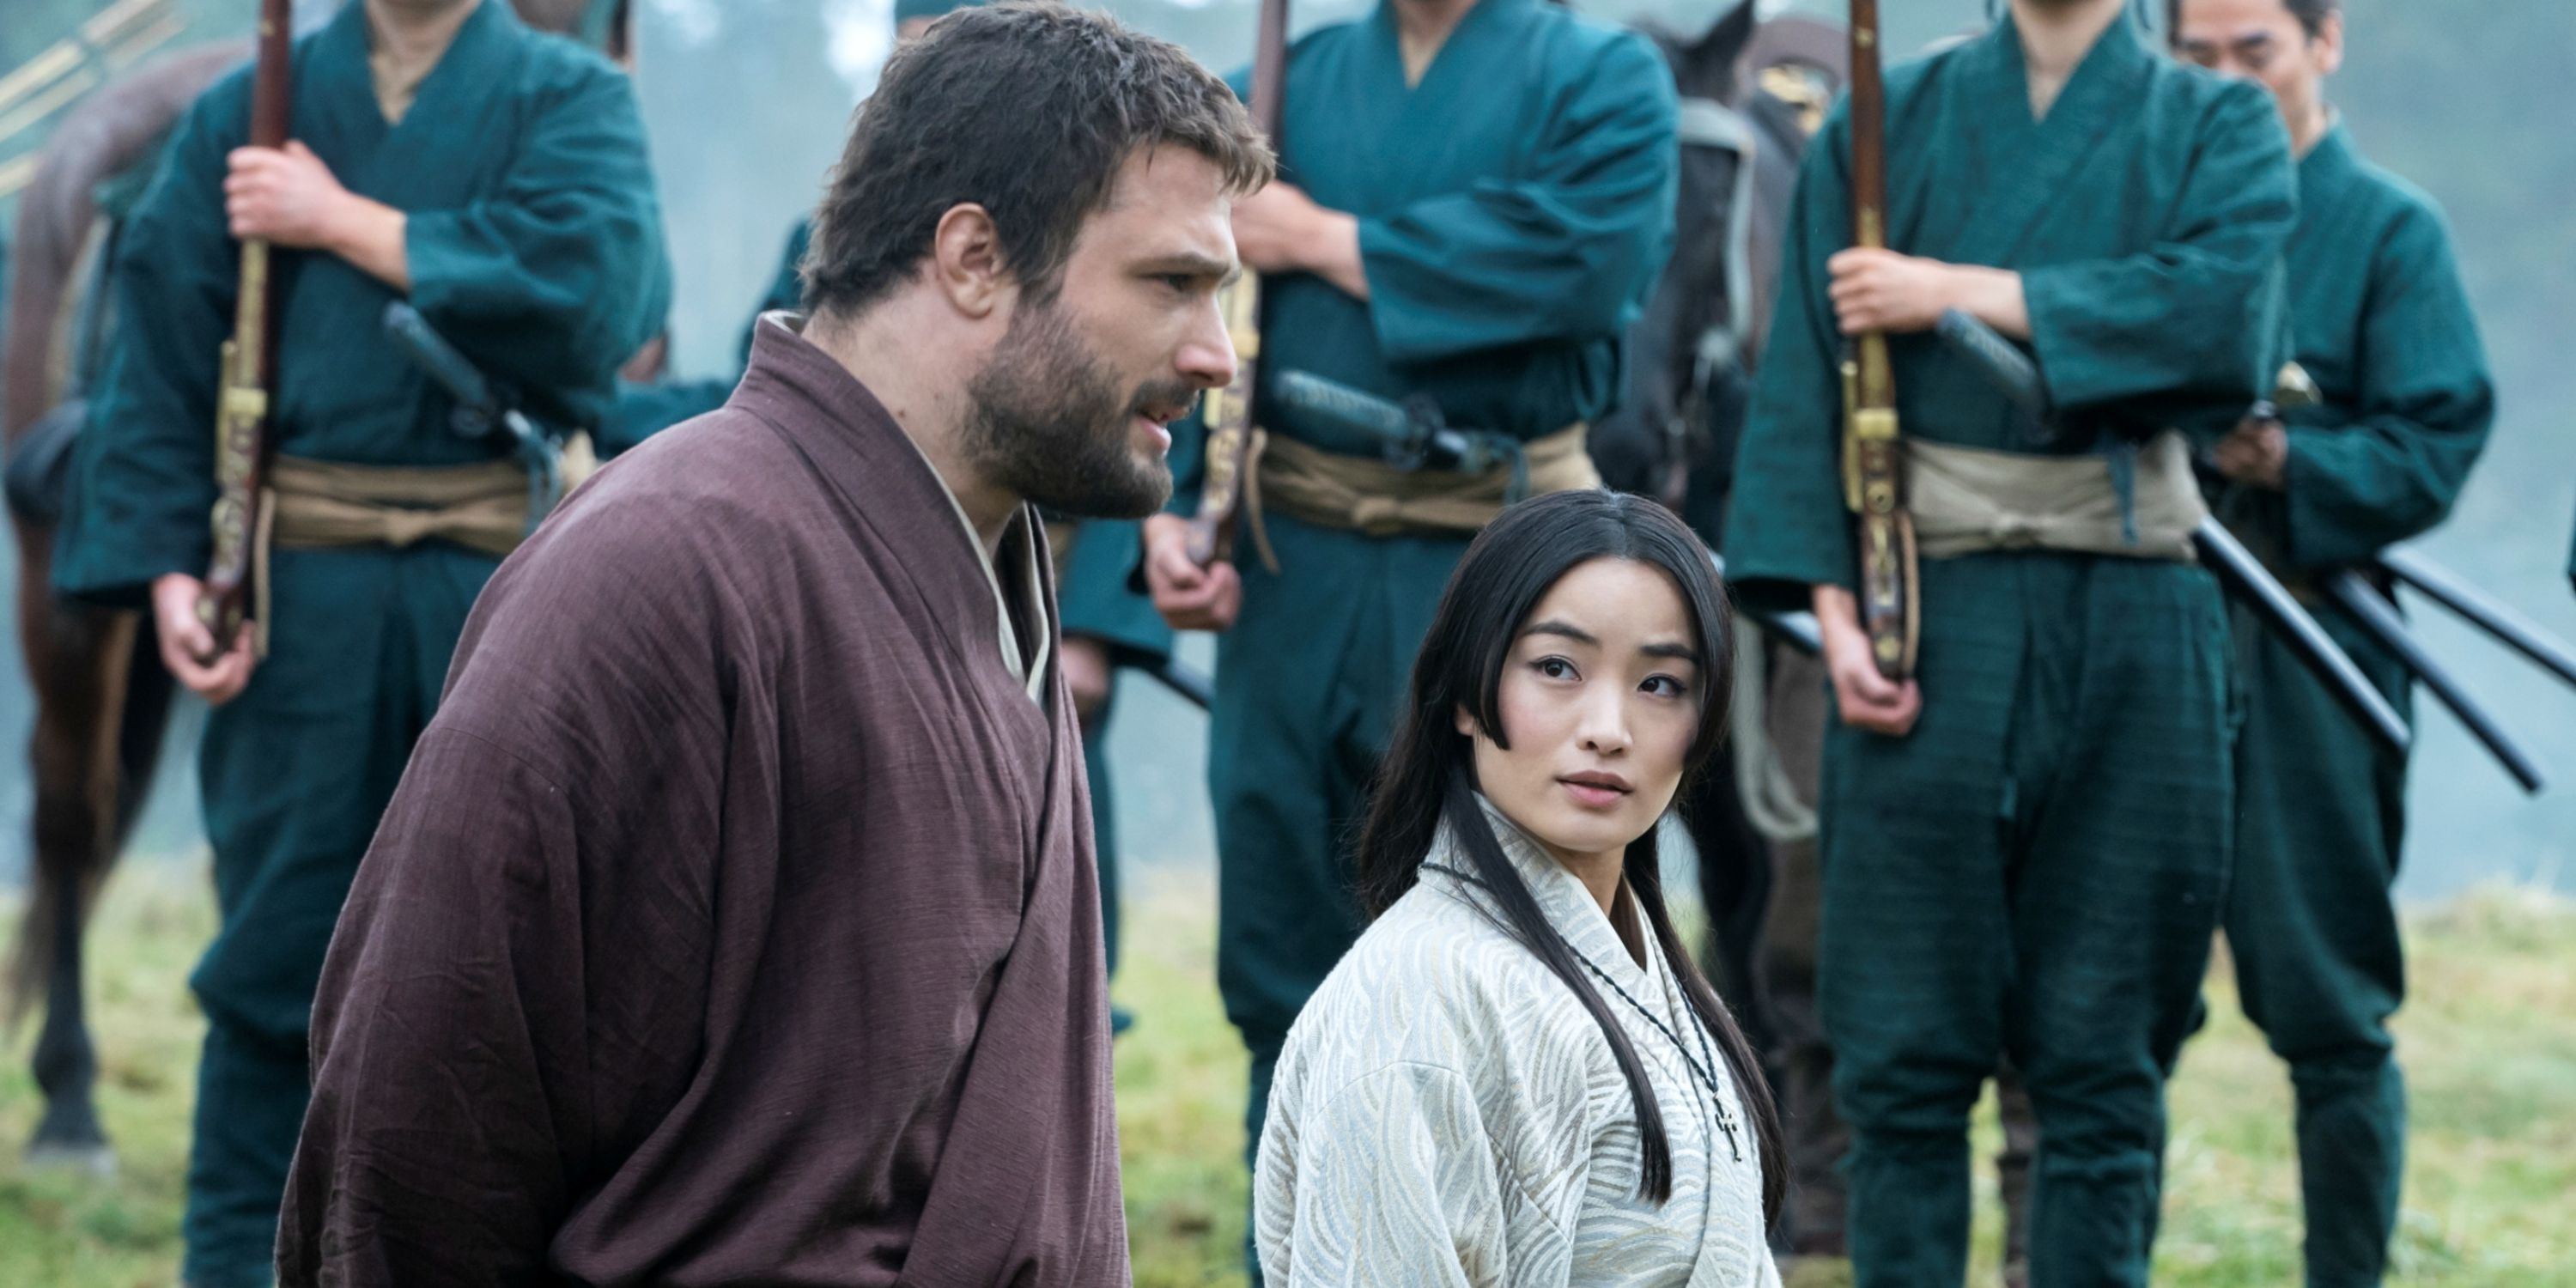 Anna Sawai as Mariko standing side by side with Cosmo Jarvis in Episode 4 of Shogun